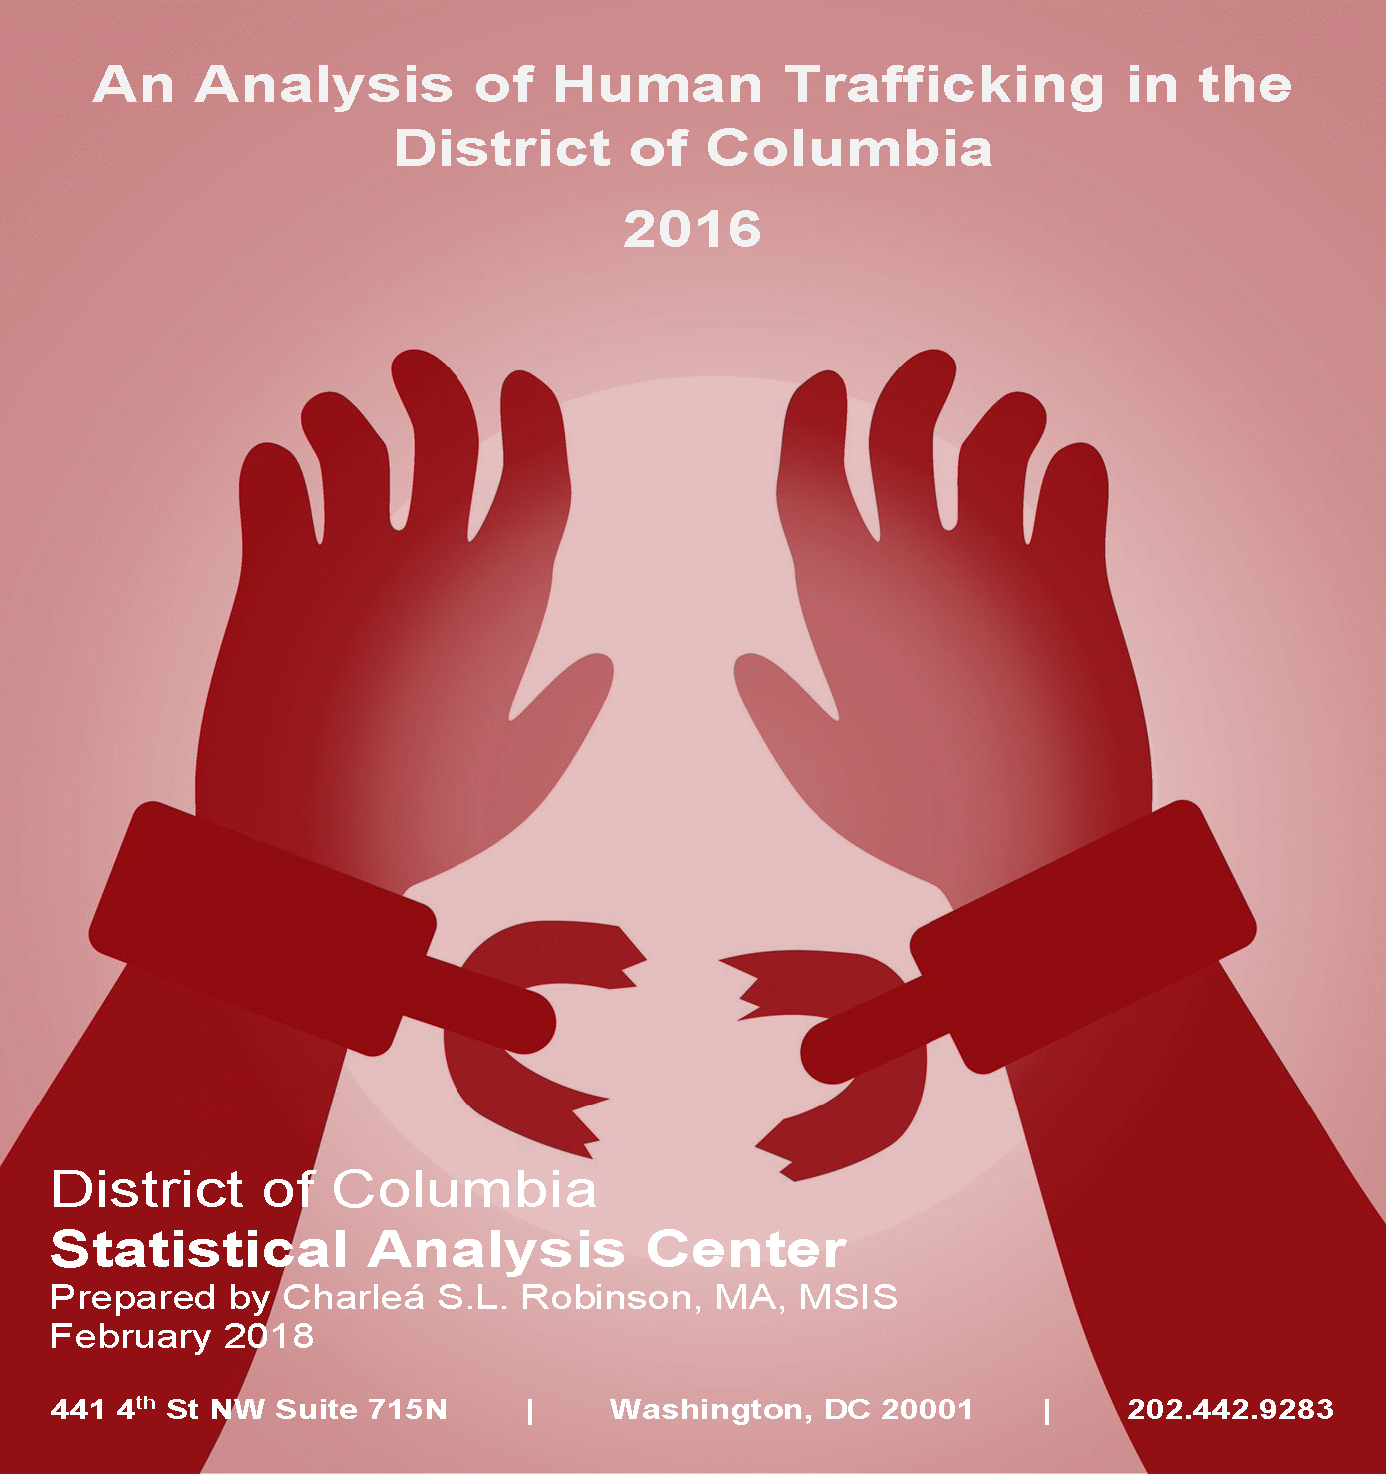 An Analysis of Human Trafficking in the District of Columbia